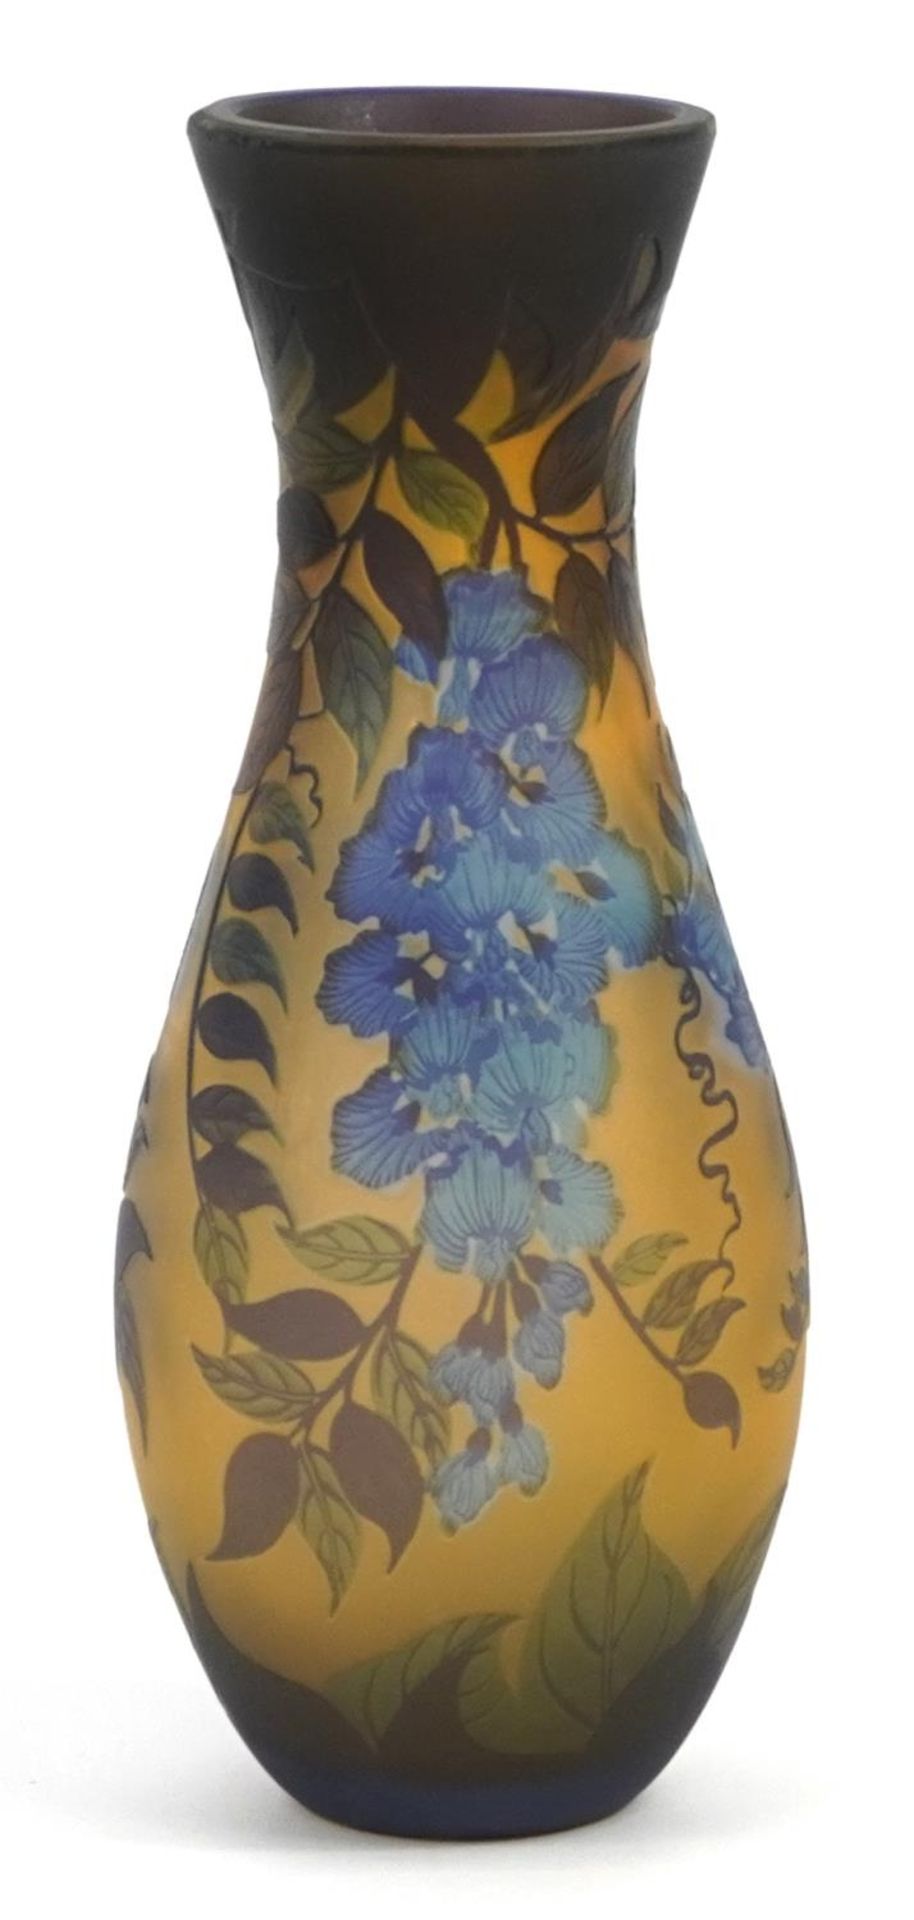 Galle style cameo glass vase decorated with flowers signed Galle Tip, 26.5cm high